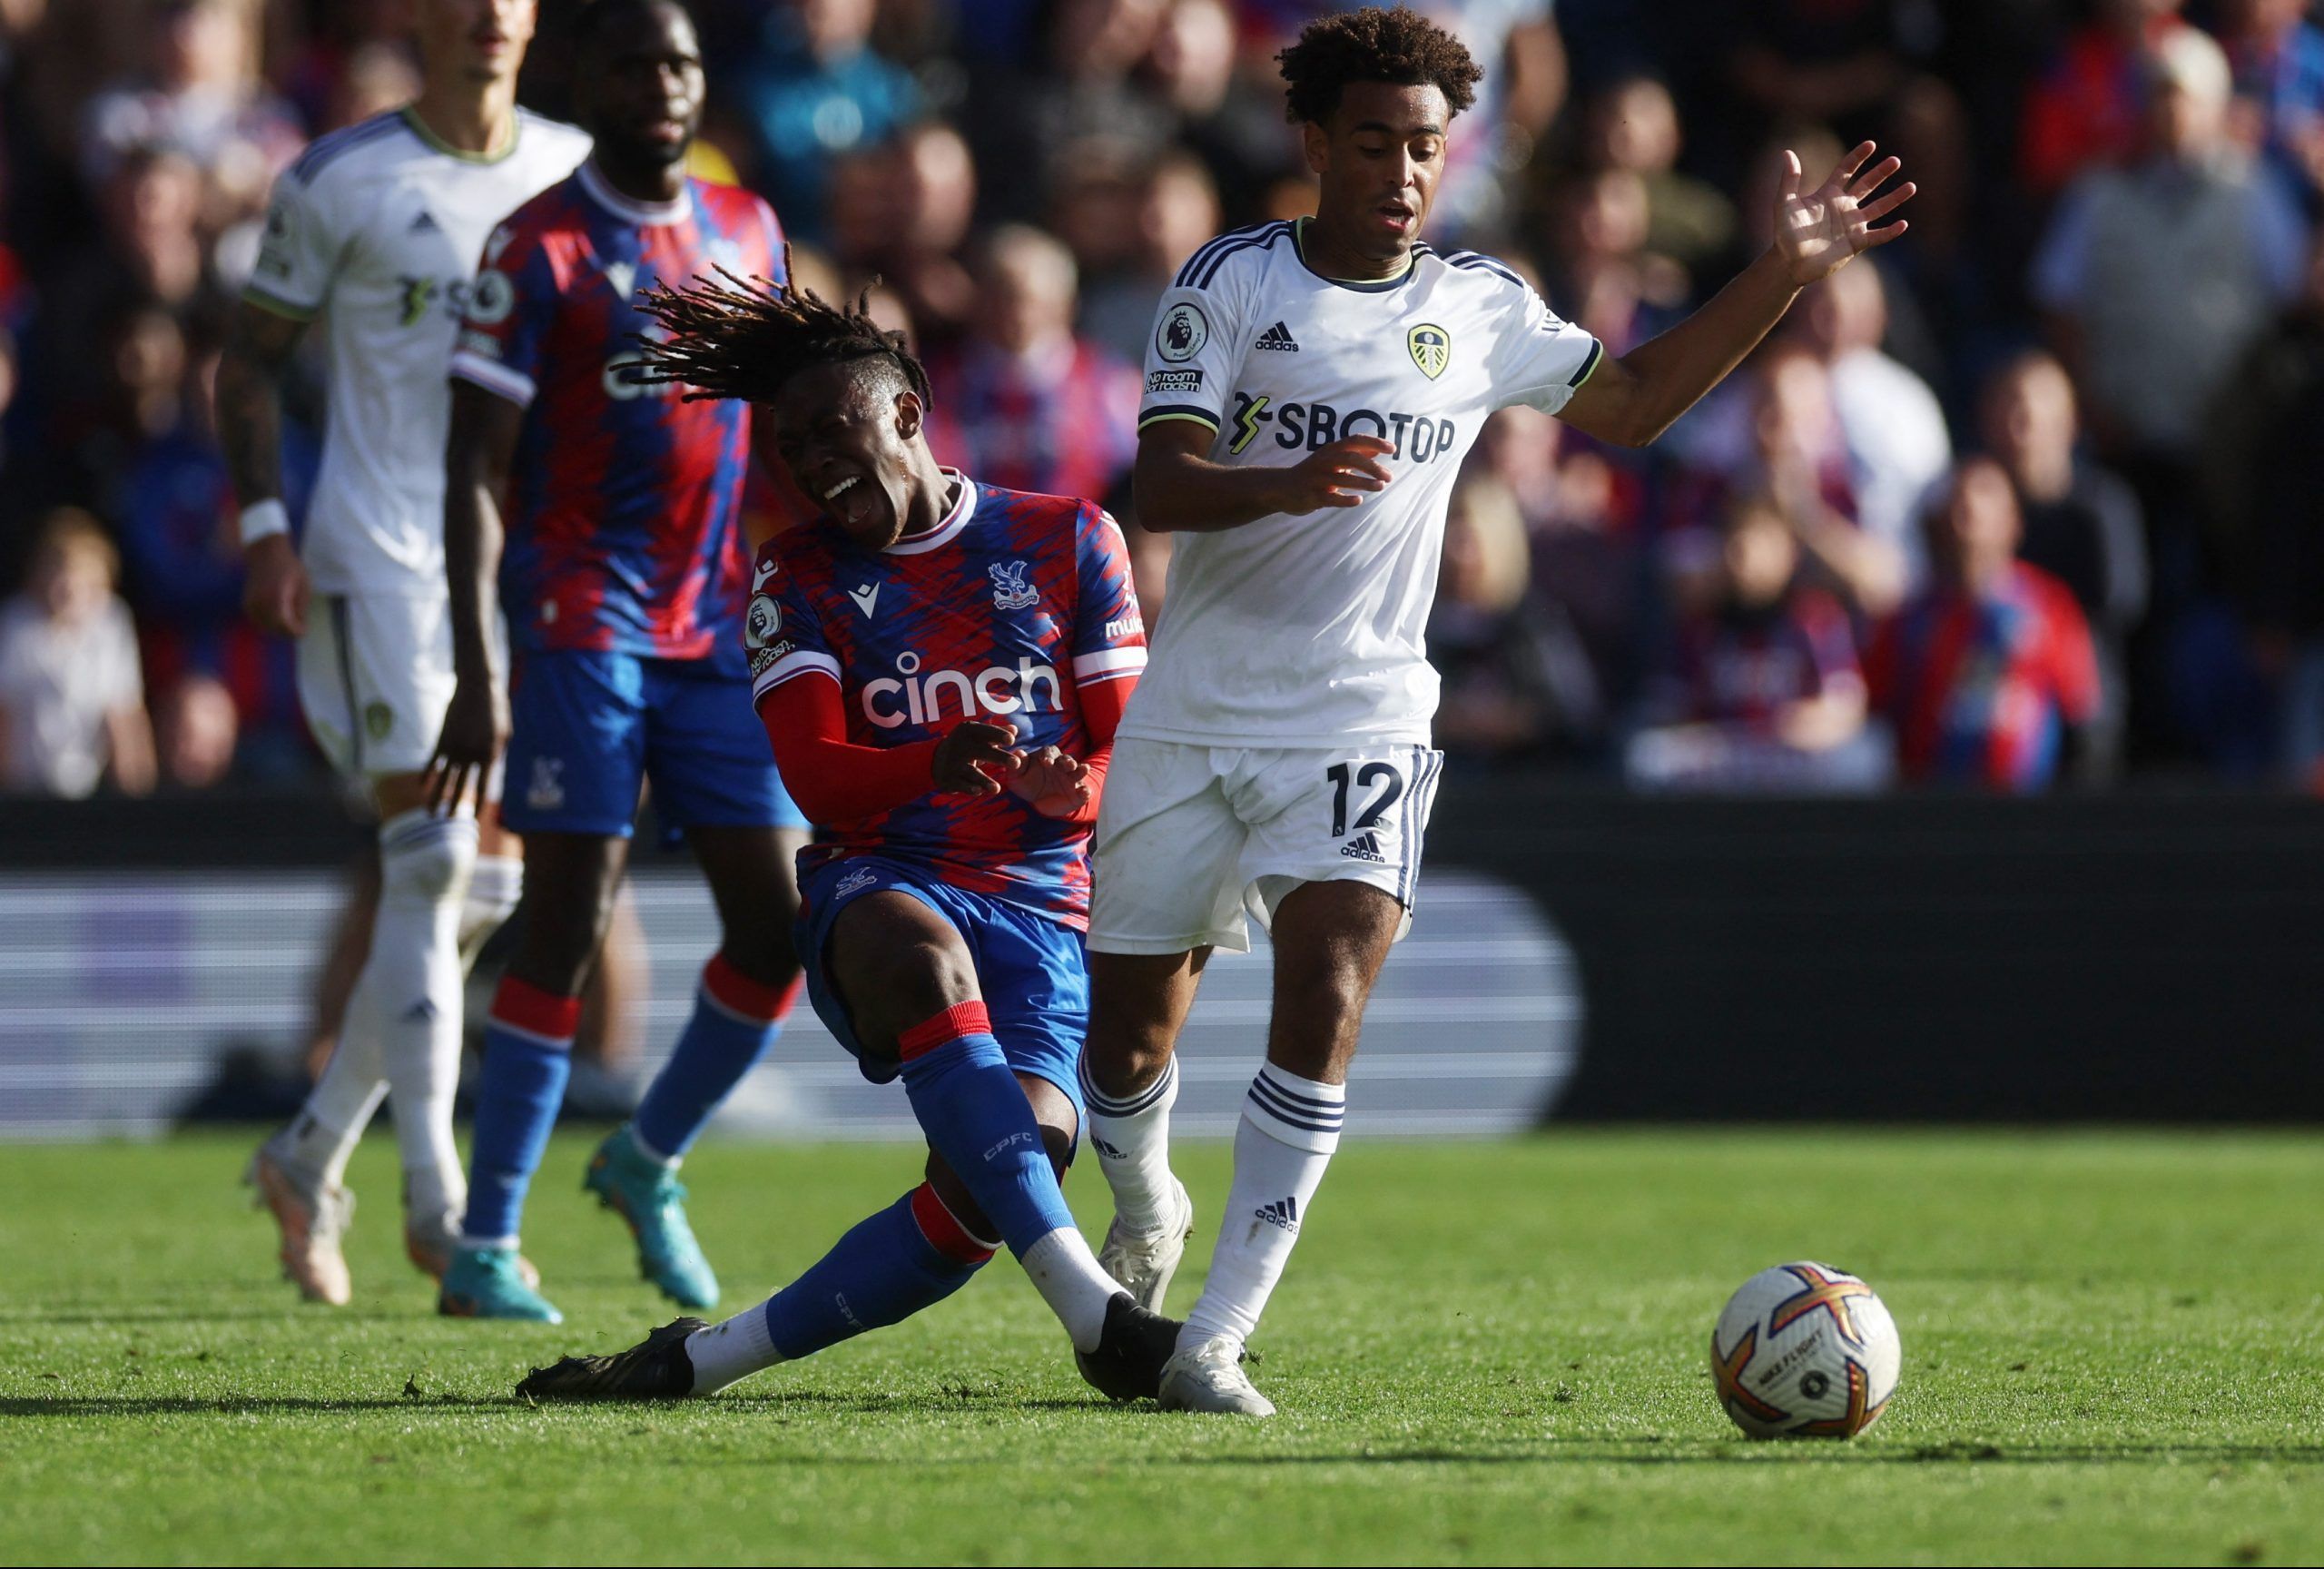 Soccer Football - Premier League - Crystal Palace v Leeds United - Selhurst Park, London, Britain - October 9, 2022 Crystal Palace's Eberechi Eze in action with Leeds United's Tyler Adams Action Images via Reuters/Paul Childs EDITORIAL USE ONLY. No use with unauthorized audio, video, data, fixture lists, club/league logos or 'live' services. Online in-match use limited to 75 images, no video emulation. No use in betting, games or single club /league/player publications.  Please contact your acco